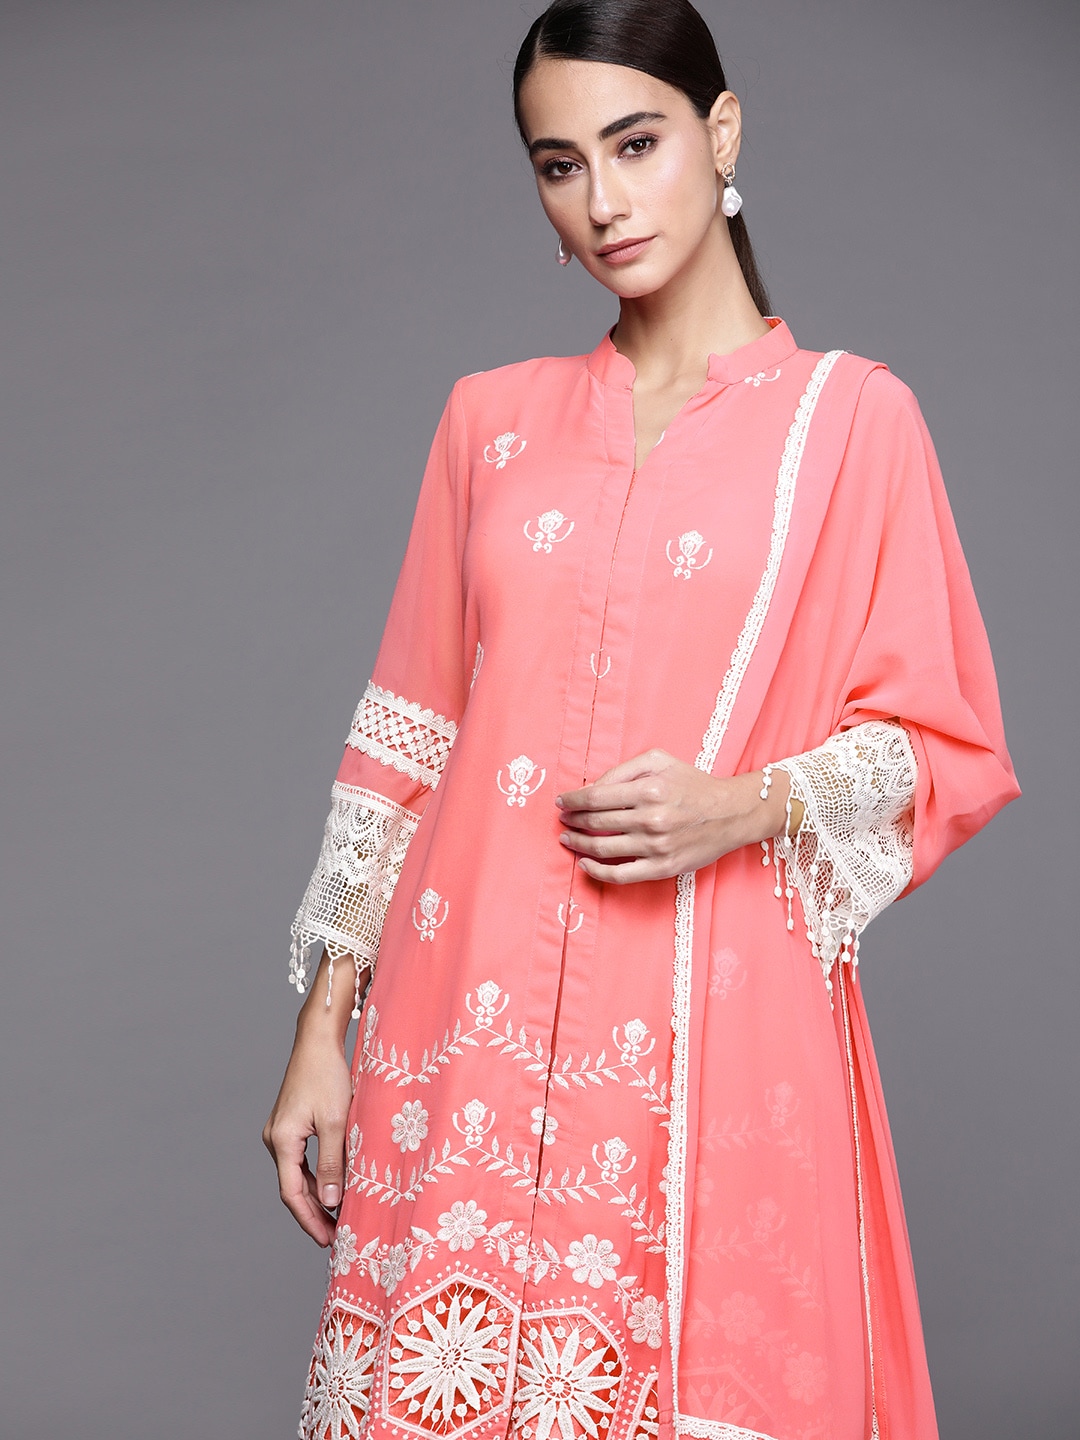 80% Off on Libas Women’s clothing